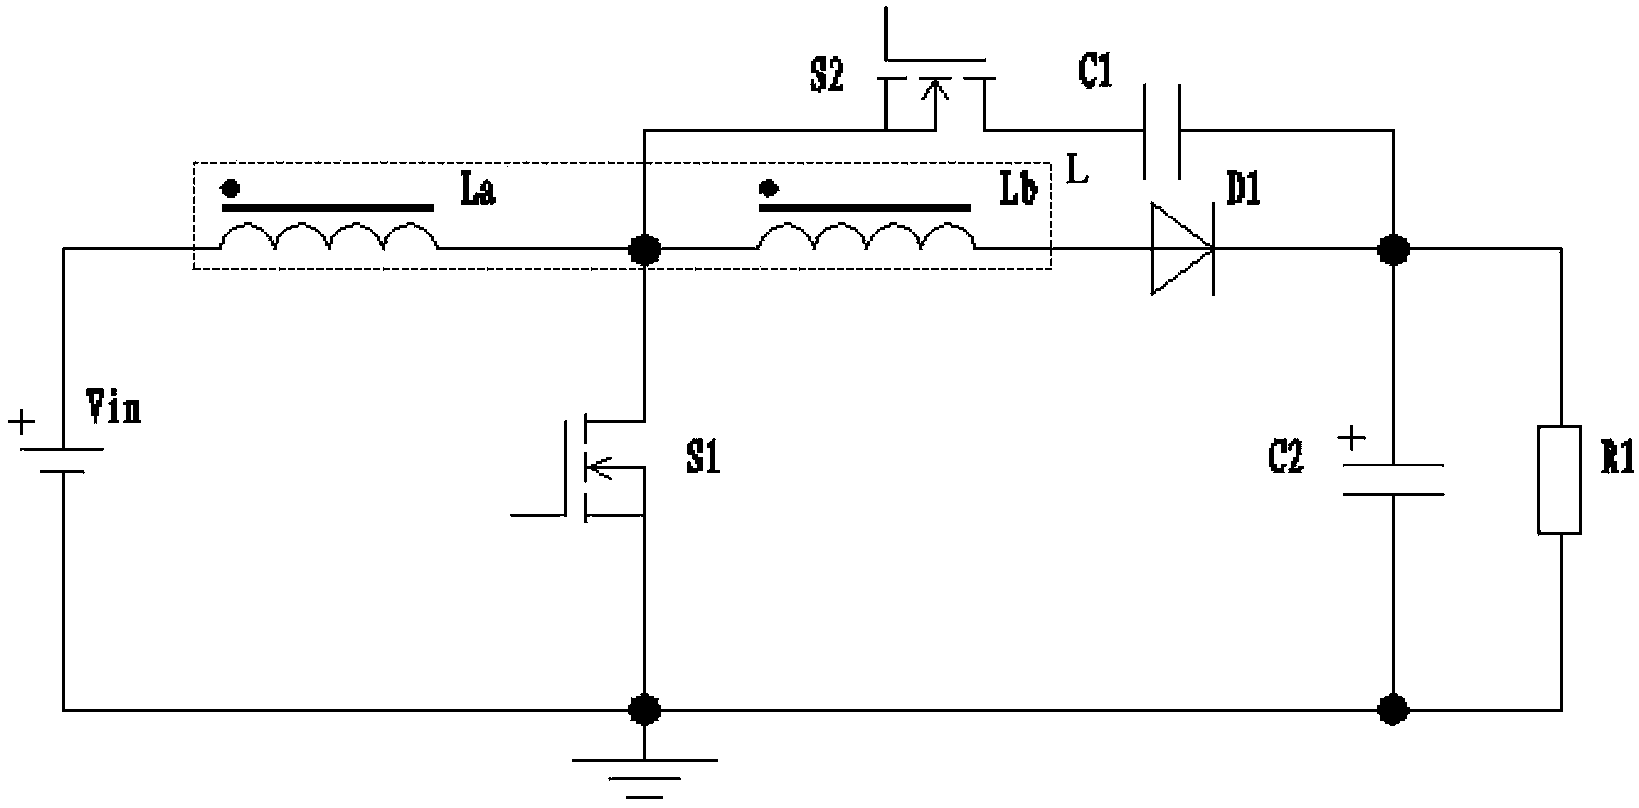 Active clamping high gain boost converter using coupling inductor